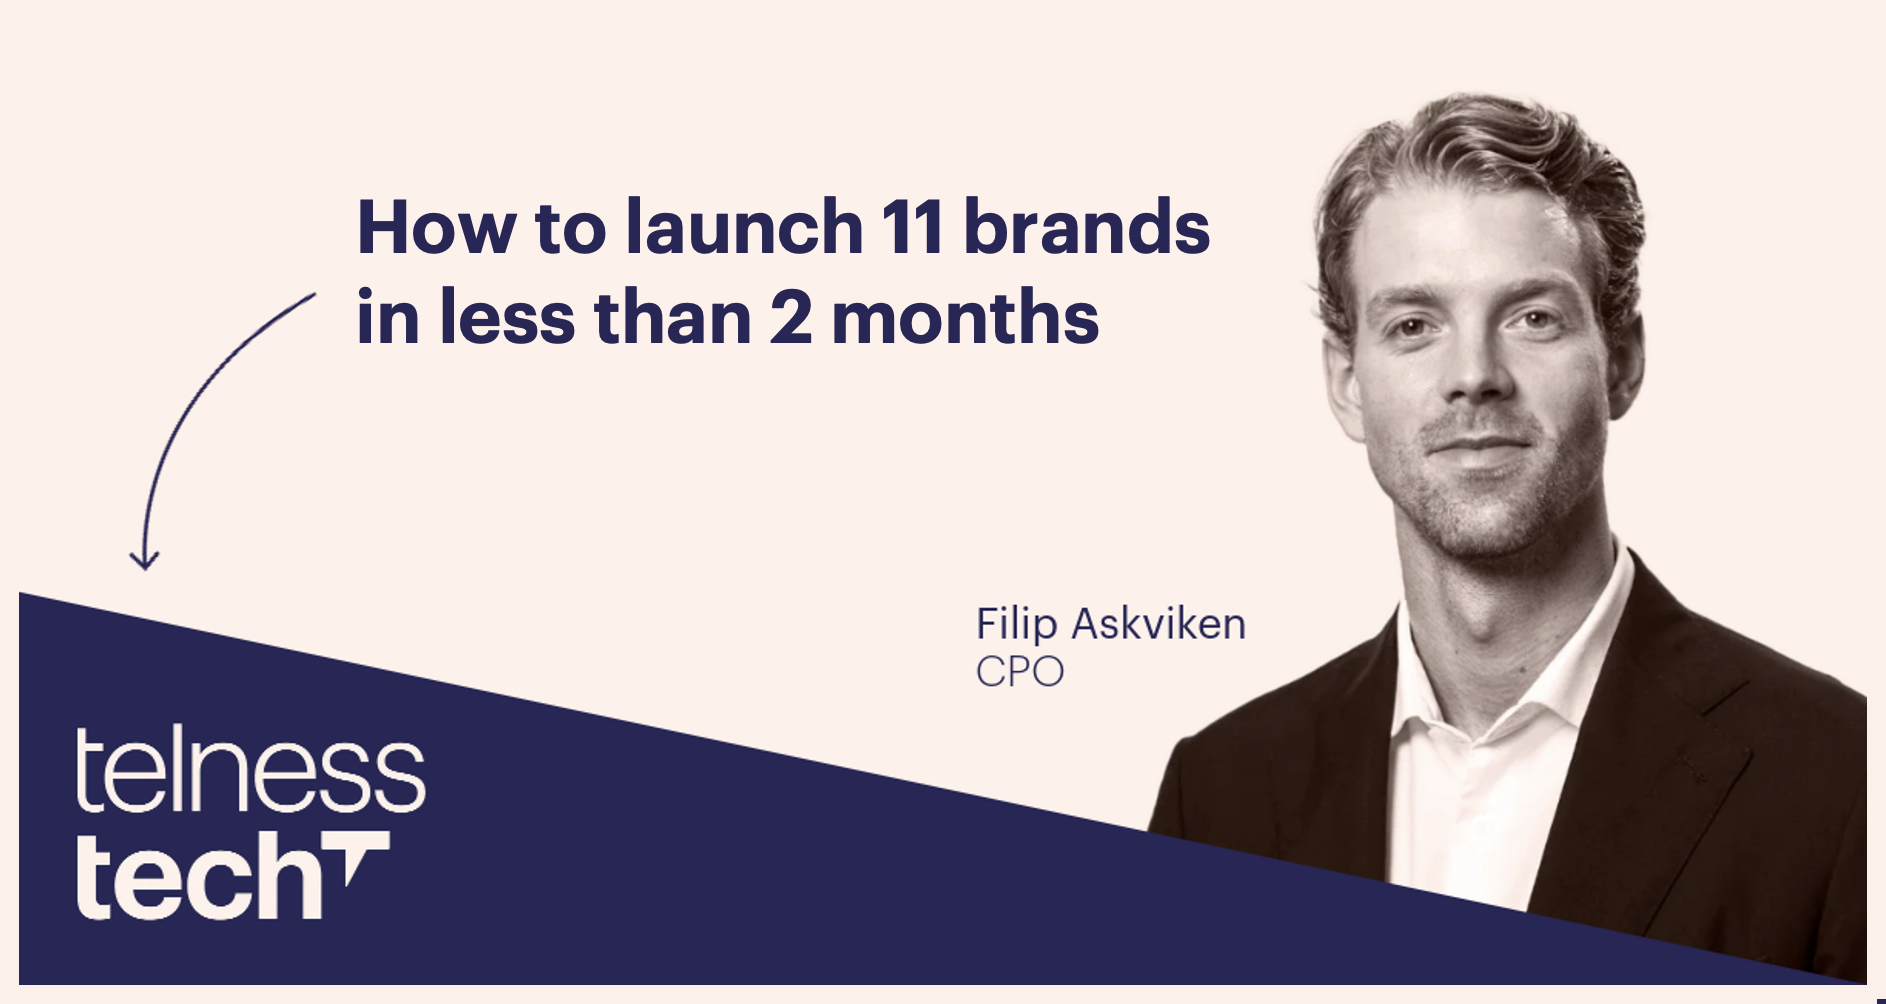 How do you launch 11 Brands in less than 2 months?